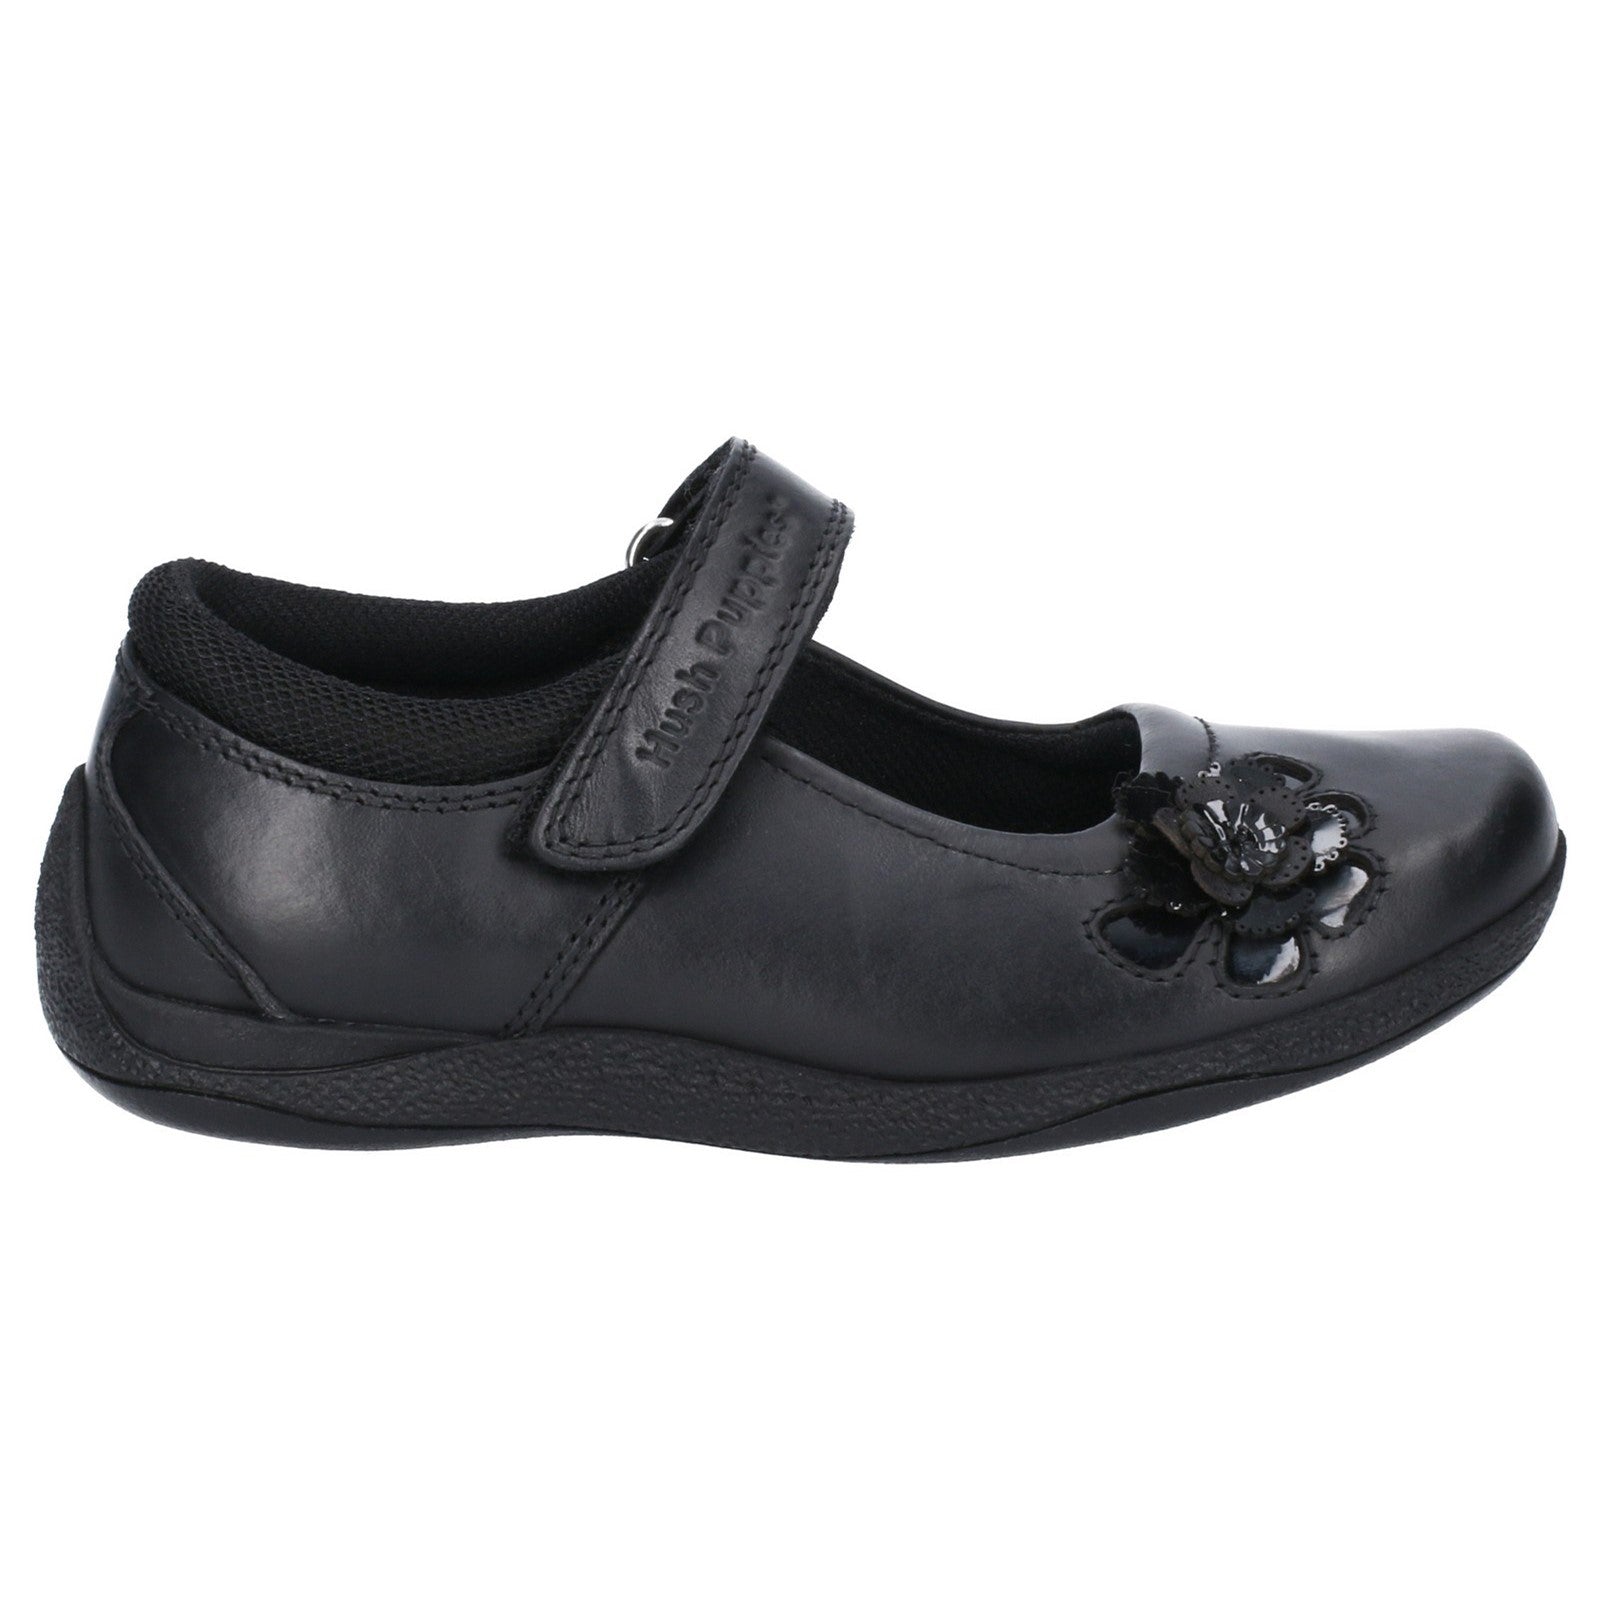 Hush Puppies Girls Jessica Leather School Shoes - Black